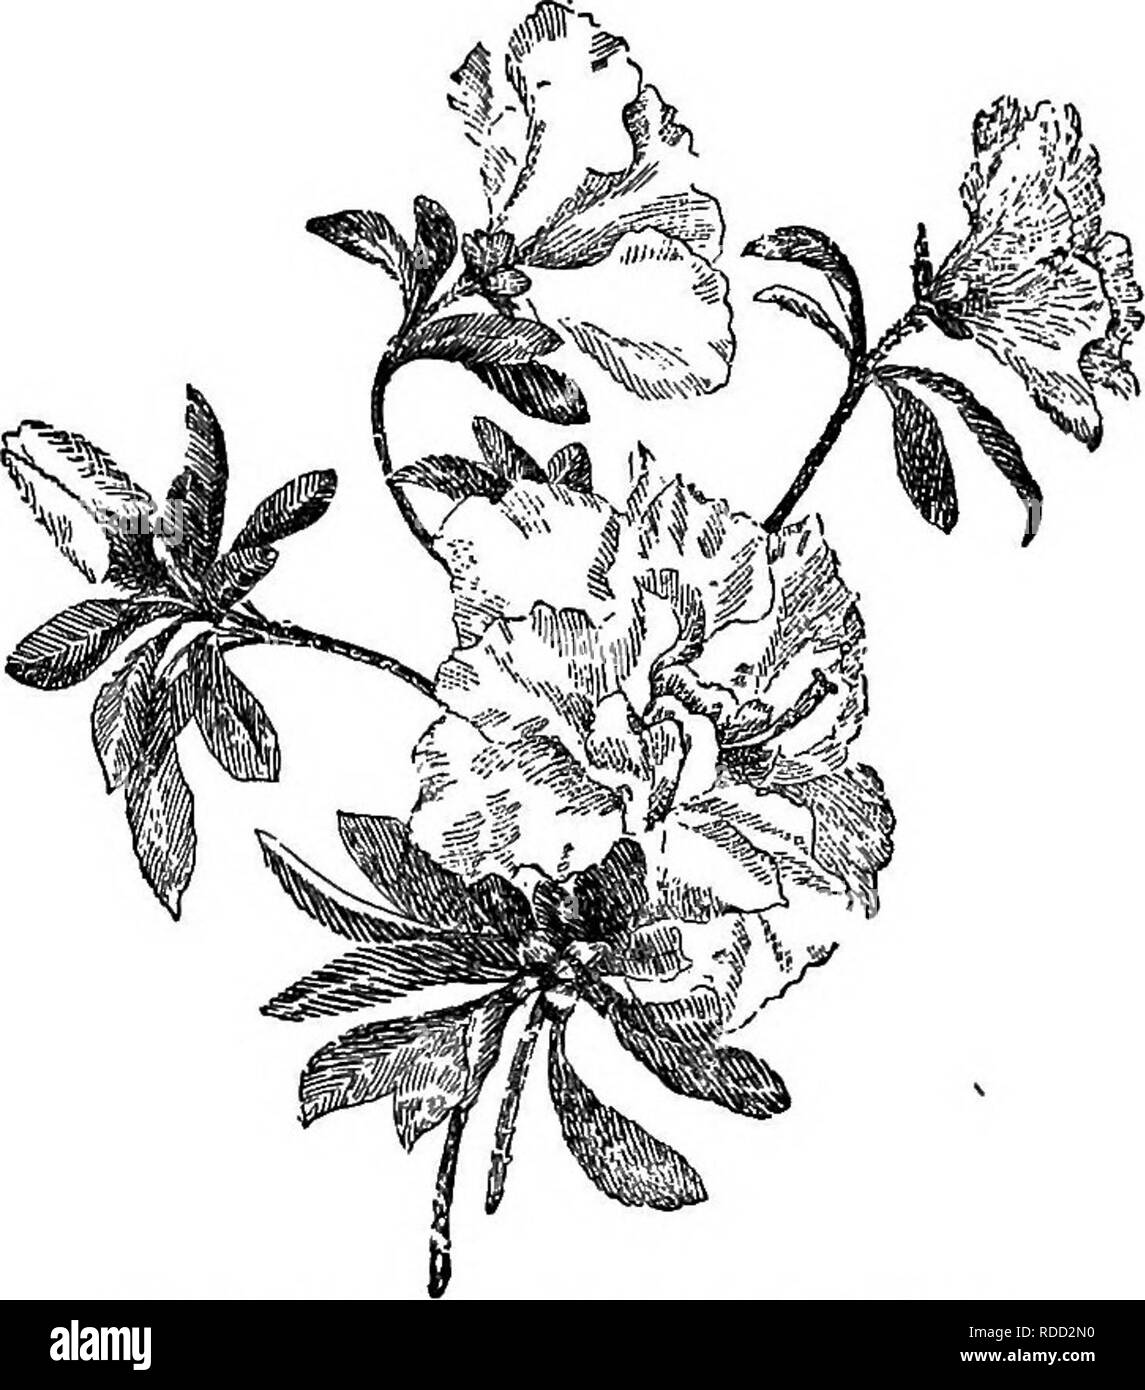 . Cyclopedia of American horticulture, comprising suggestions for cultivation of horticultural plants, descriptions of the species of fruits, vegetables, flowers, and ornamental plants sold in the United States and Canada, together with geographical and biographical sketches. Gardening. Azalea Indica (XM).. 176. Double-flowered Azalea Indica (X ^). colored or carmine ; calyx-lobes lanceolate ; stamens 10, with purple anthers. May, June. China. B.M. 1480. L.B.C. 3:275. (2) Lvs. obovate or obovate-lanceolate, obtuse, rarely acute ; %-S in. long, less strigose, and usually shining above : low, mu Stock Photo